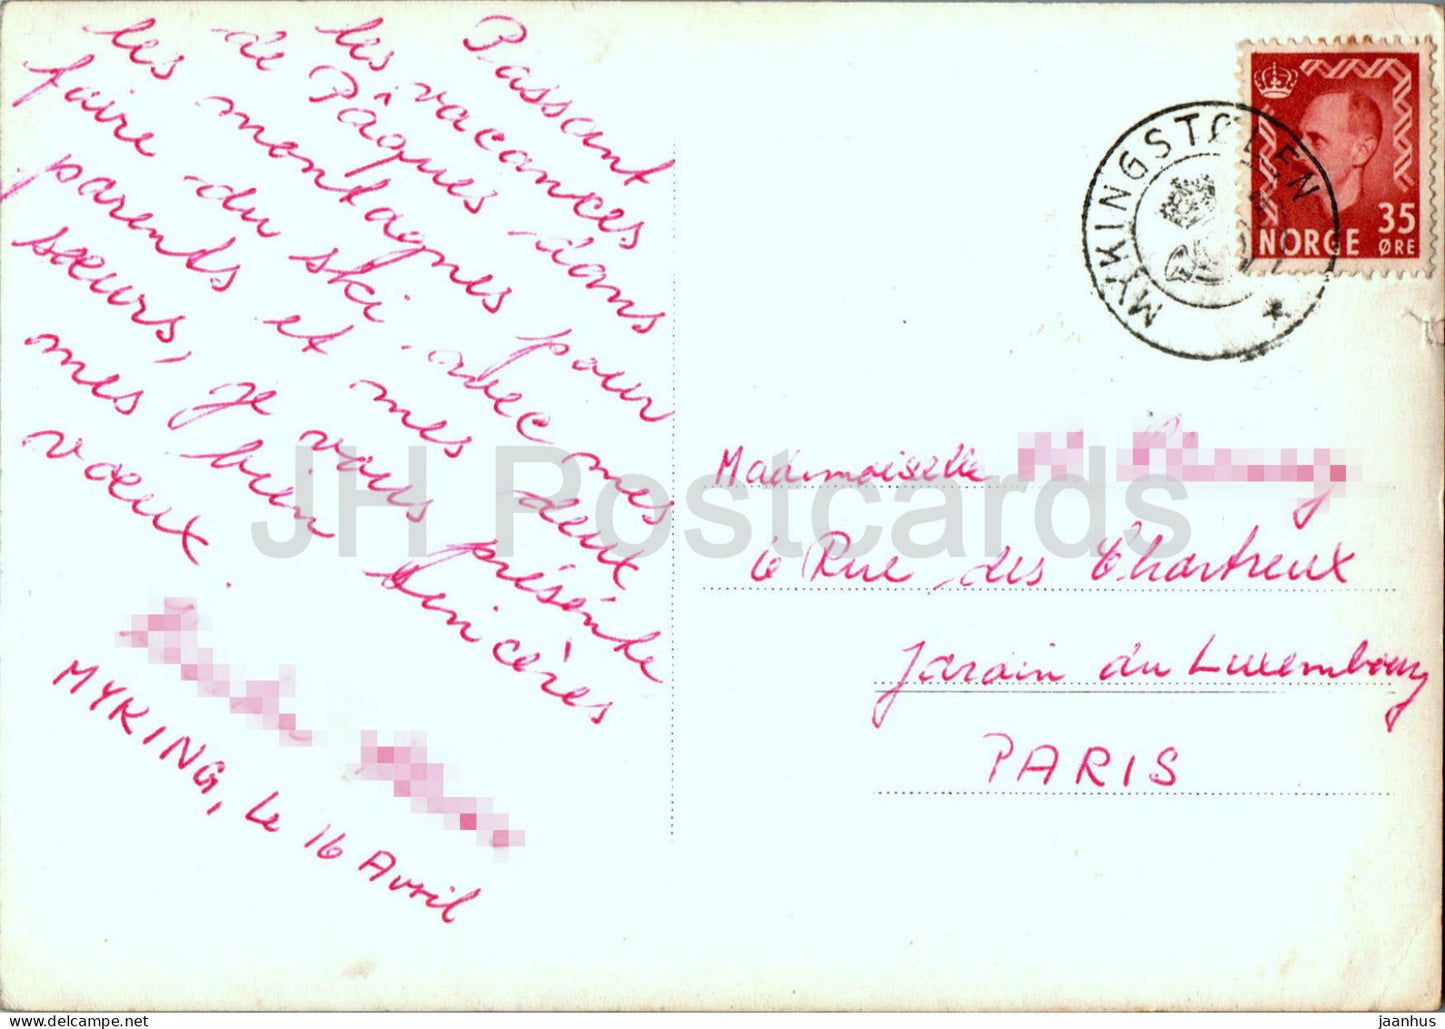 Fra Finse - old postcard - Norway - used